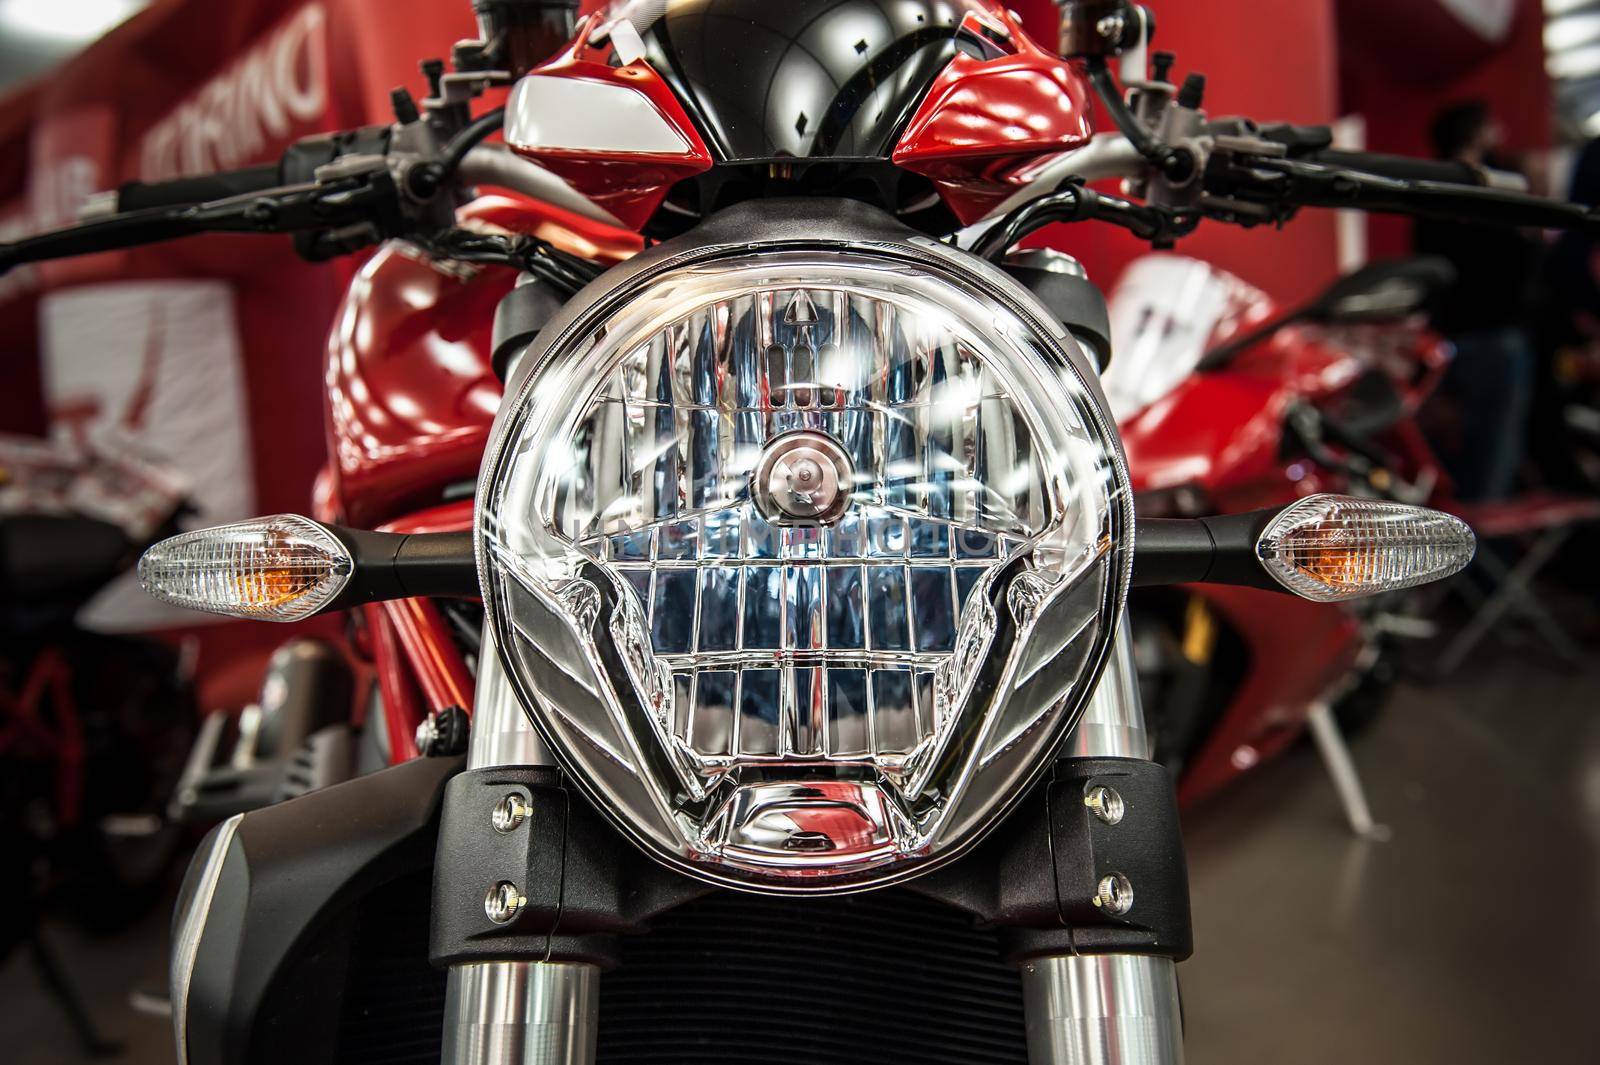 Headlight of a modern motorcycle by cla78